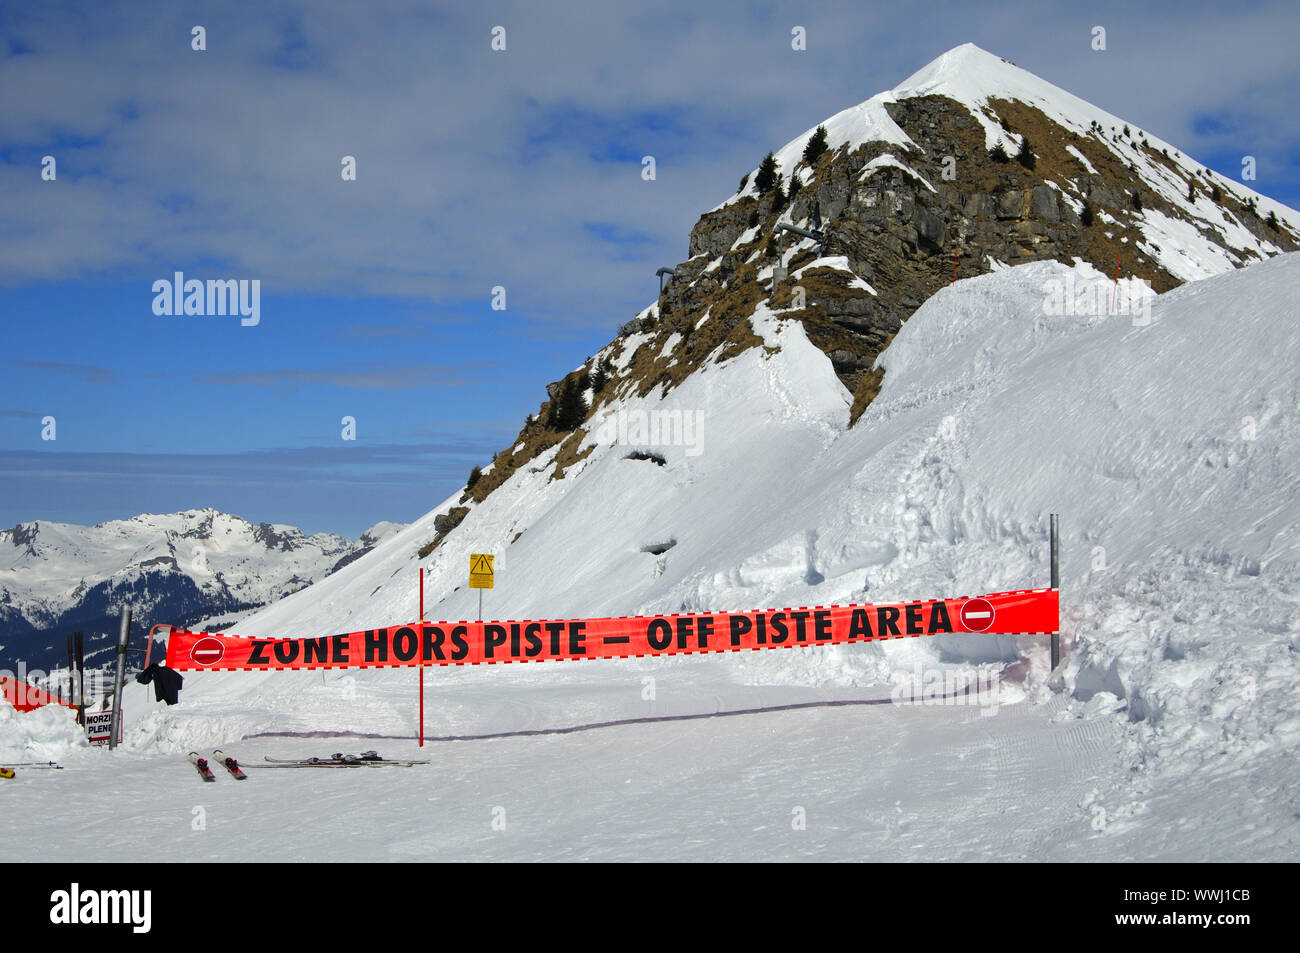 Warning sign on a closed slope in the ski area Morzine Avoriaz Stock Photo